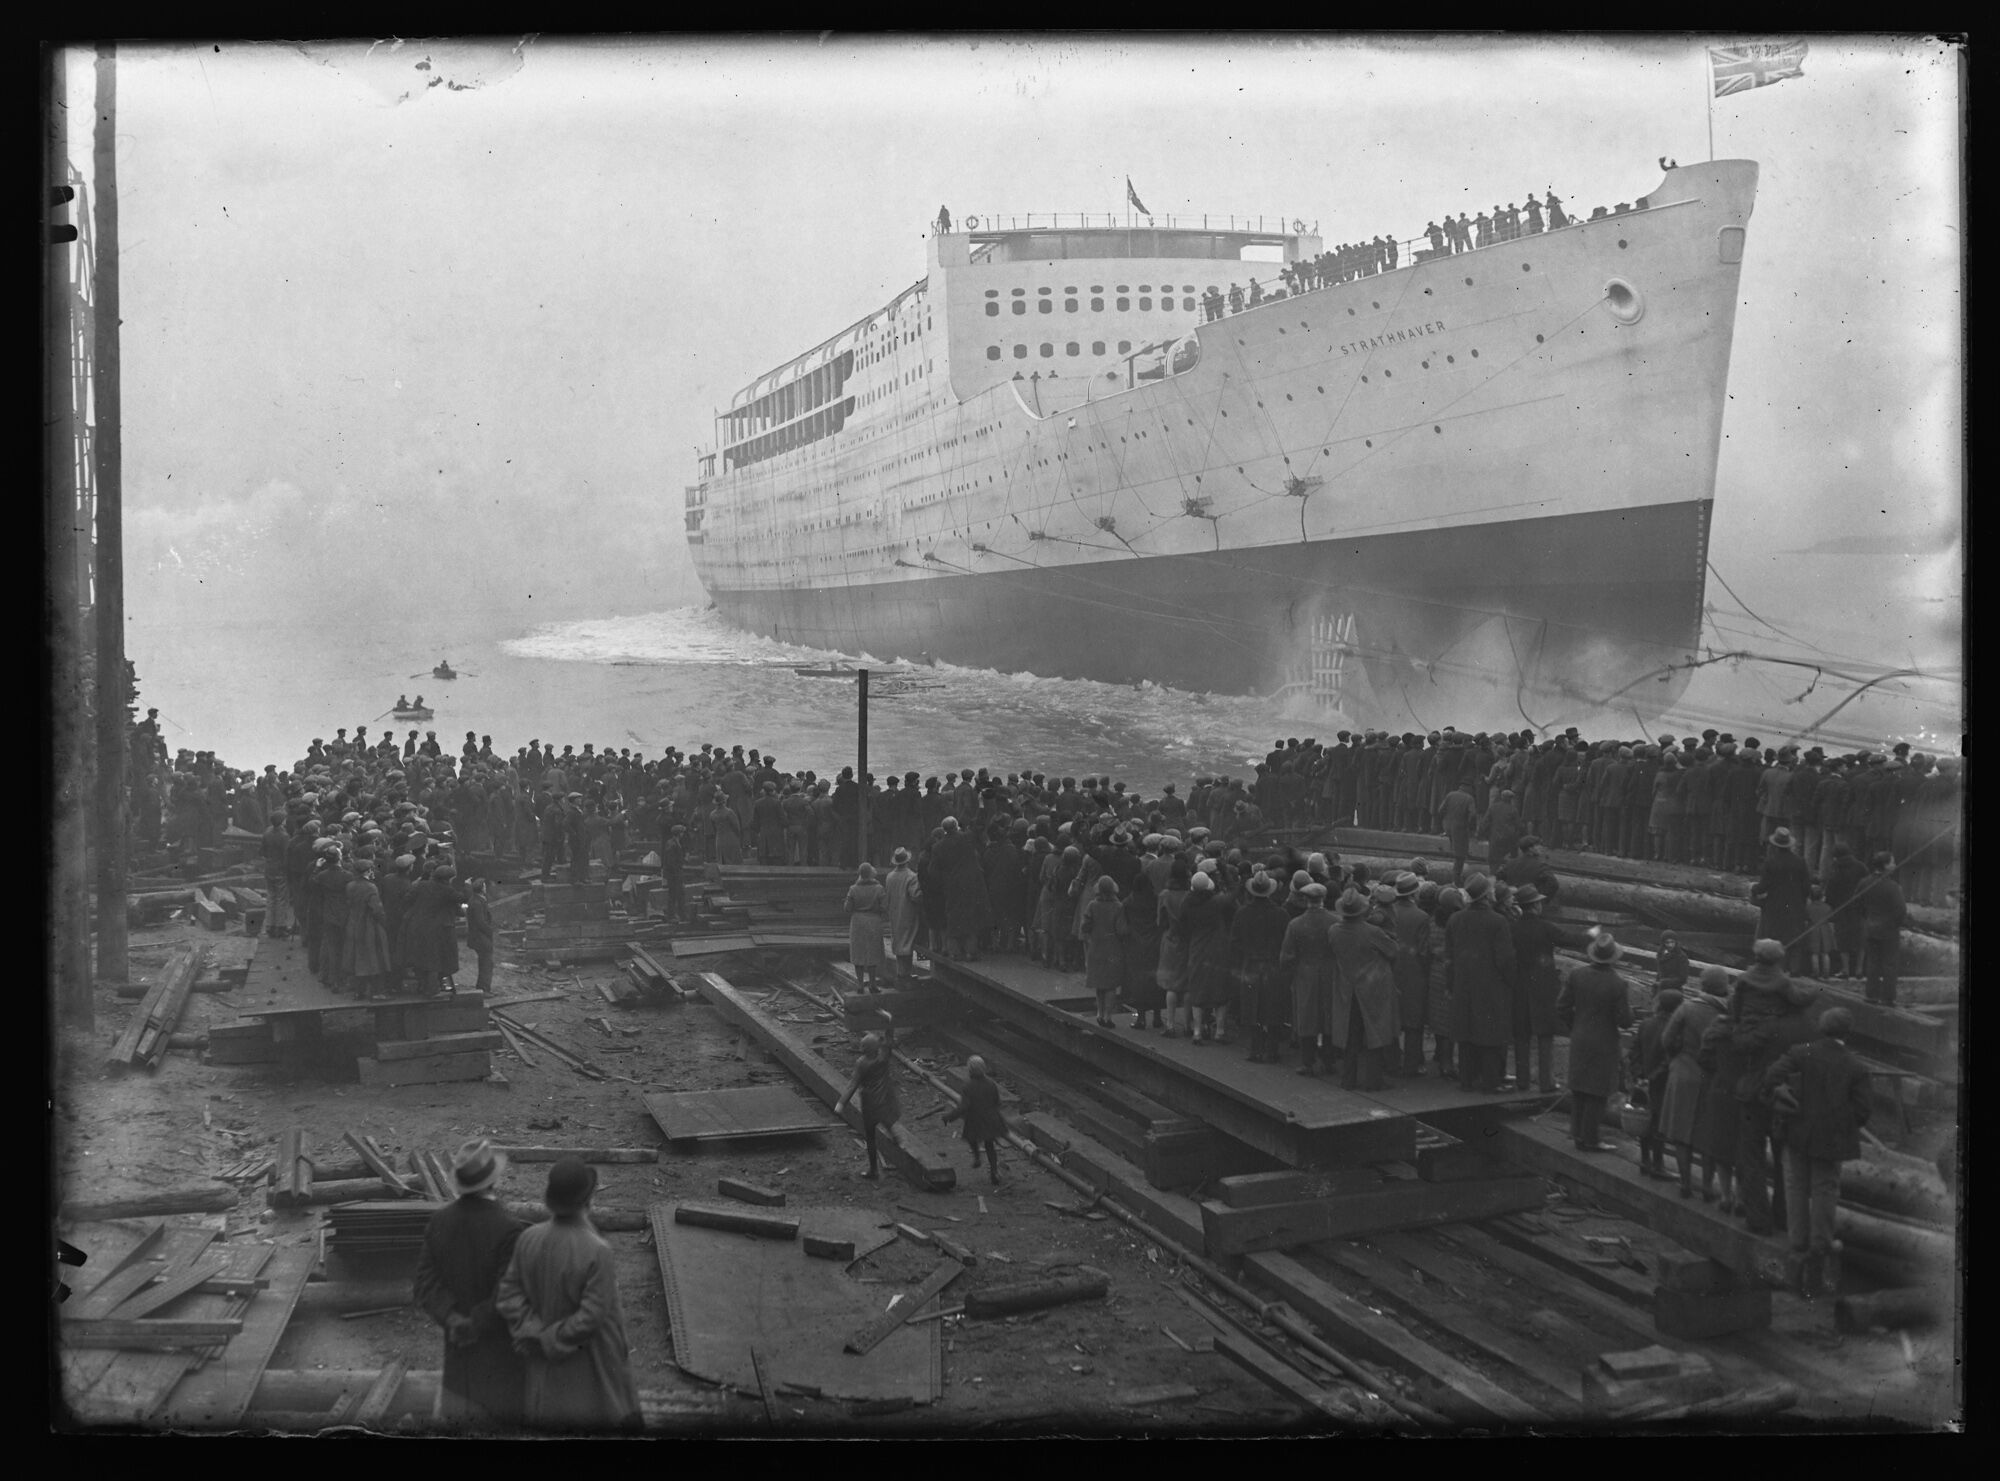 Launch of P&O Liner Strathnaver, Walney Channel, Barrow-in-Furness